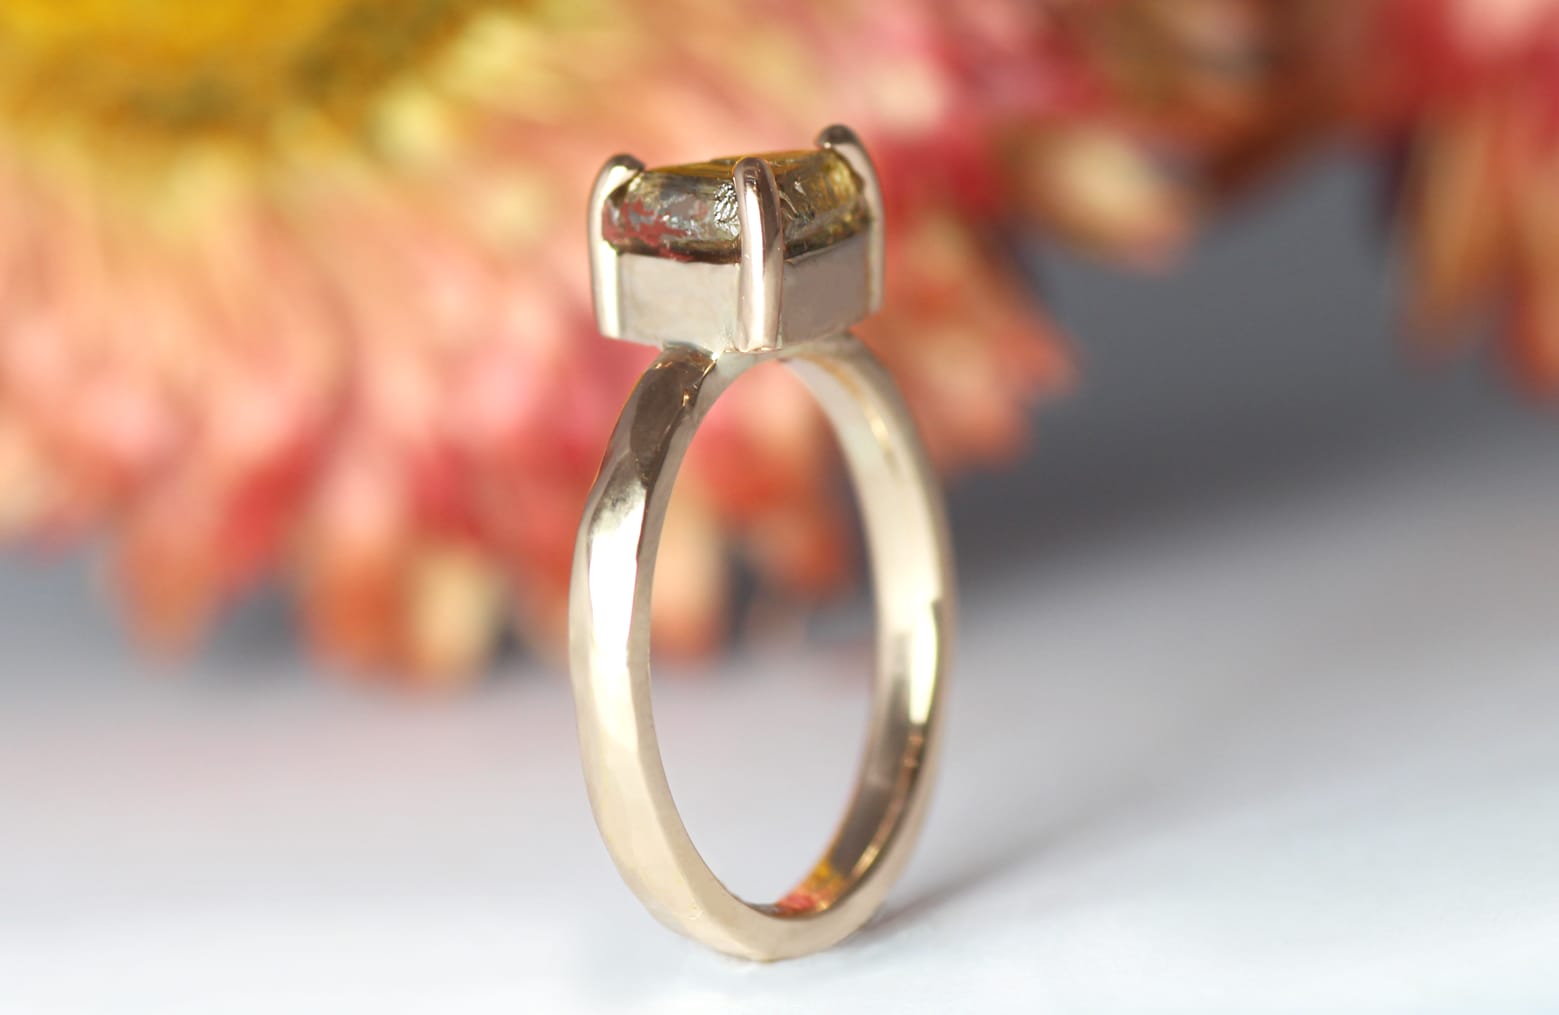 18ct Fairtrade rose gold with rough macle diamond by Zoe Pook Jewellery